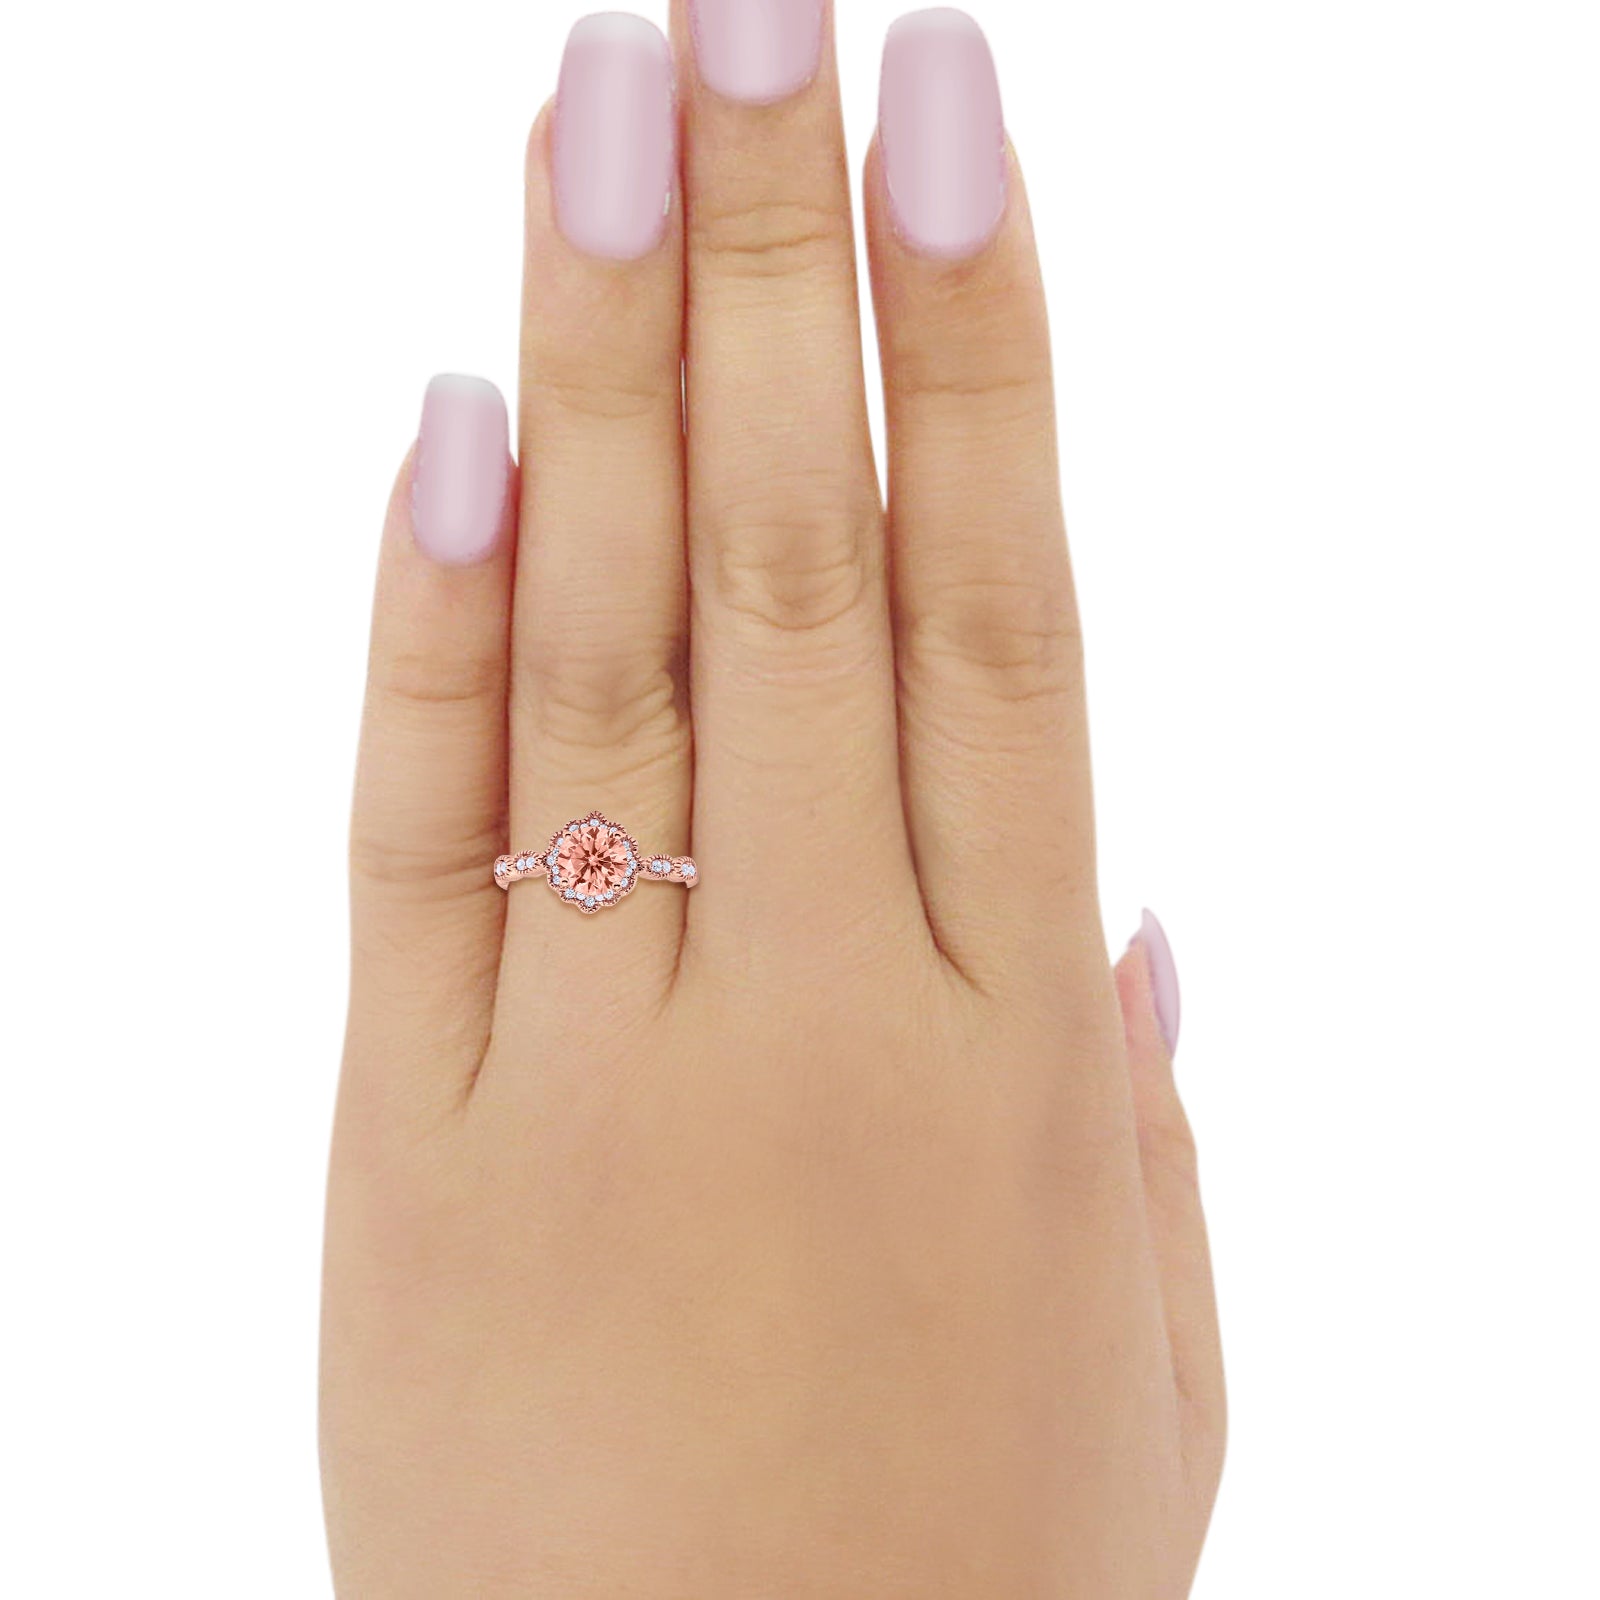 Floral Art Engagement Ring Round Rose Tone, Simulated Morganite CZ 925 Sterling Silver